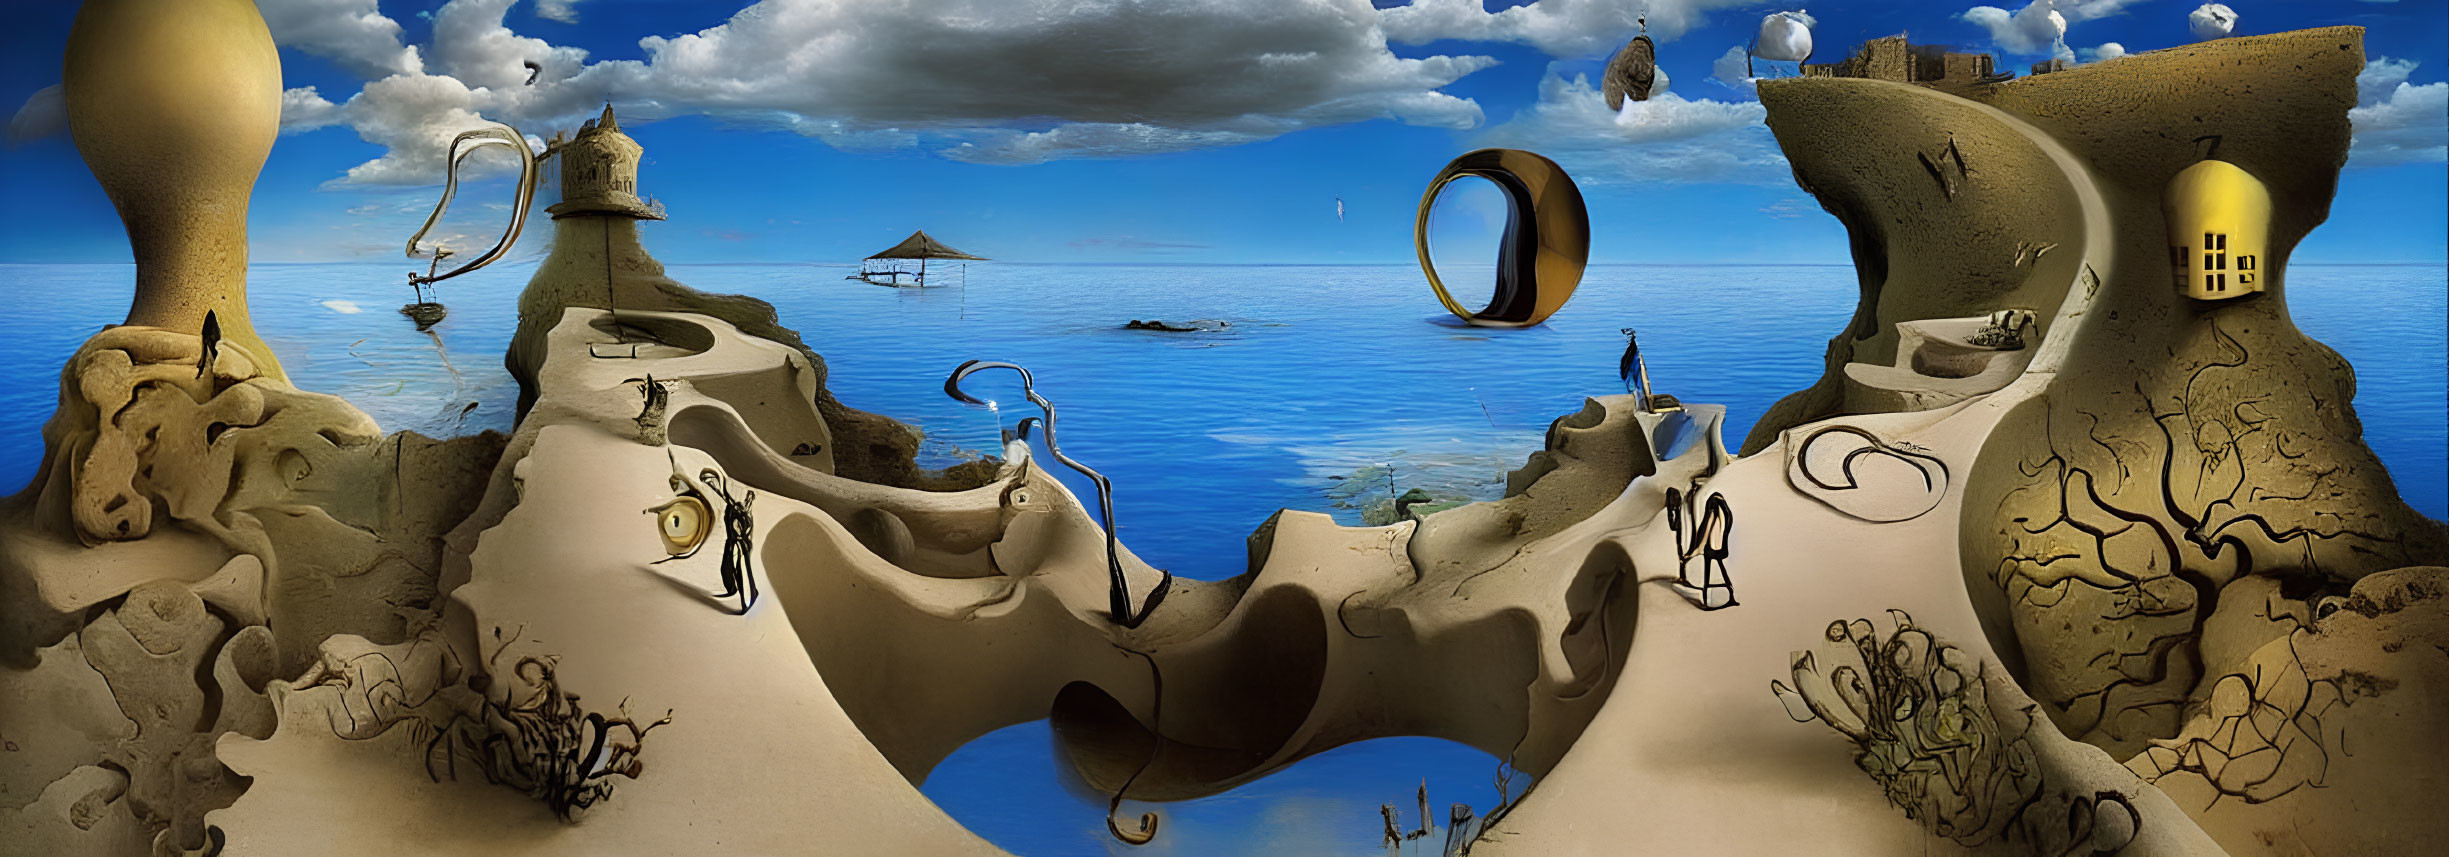 Surreal landscape featuring melting clocks, distorted desert, water bodies, and floating architectural elements